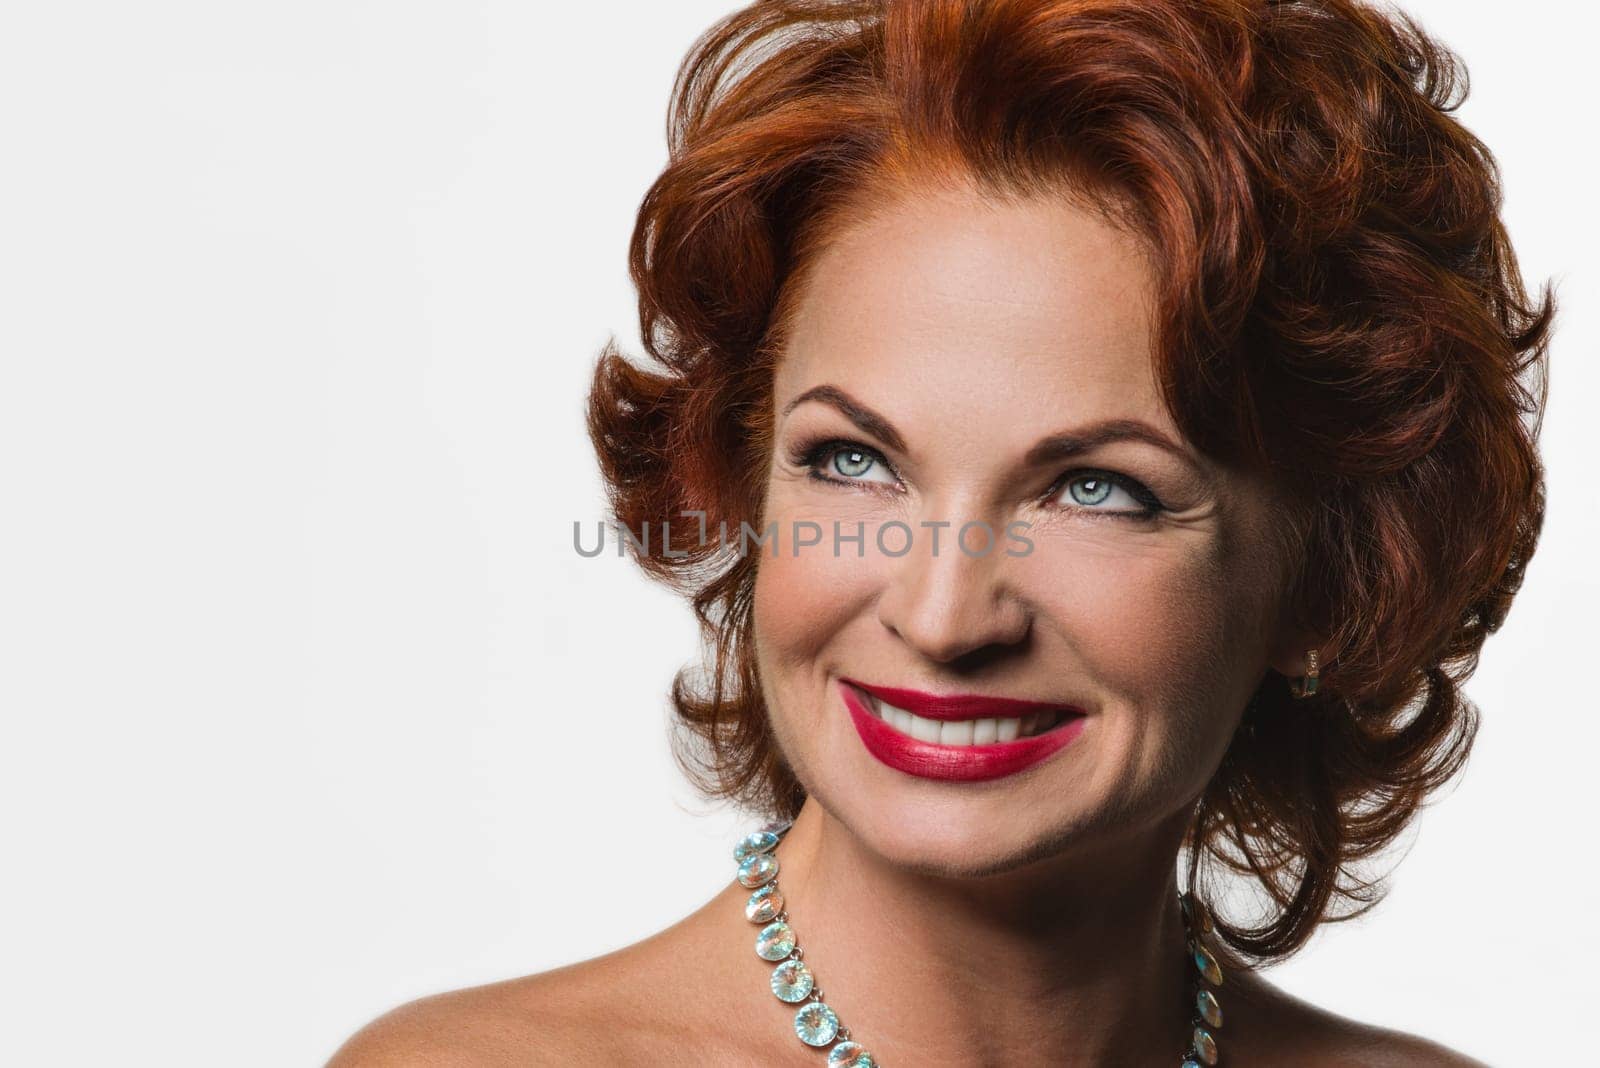 Portrait of beautiful redhead middle aged woman with hairstyle and makeup looking to the side, on white isolated. Head shot of a smiling woman with teeth